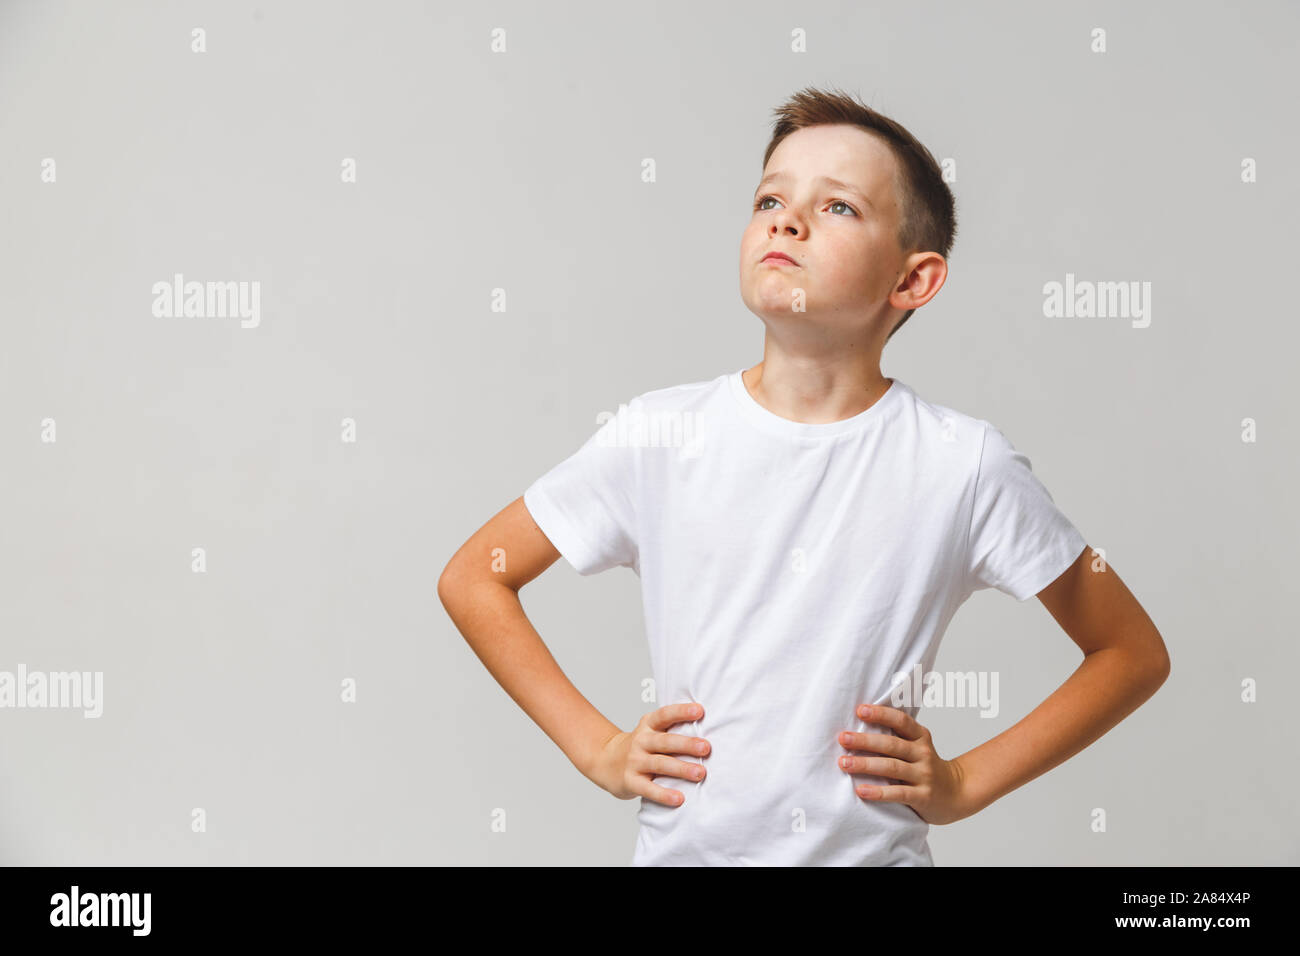 Portrait of young boy with hands on his waist lifting his head on white background Stock Photo